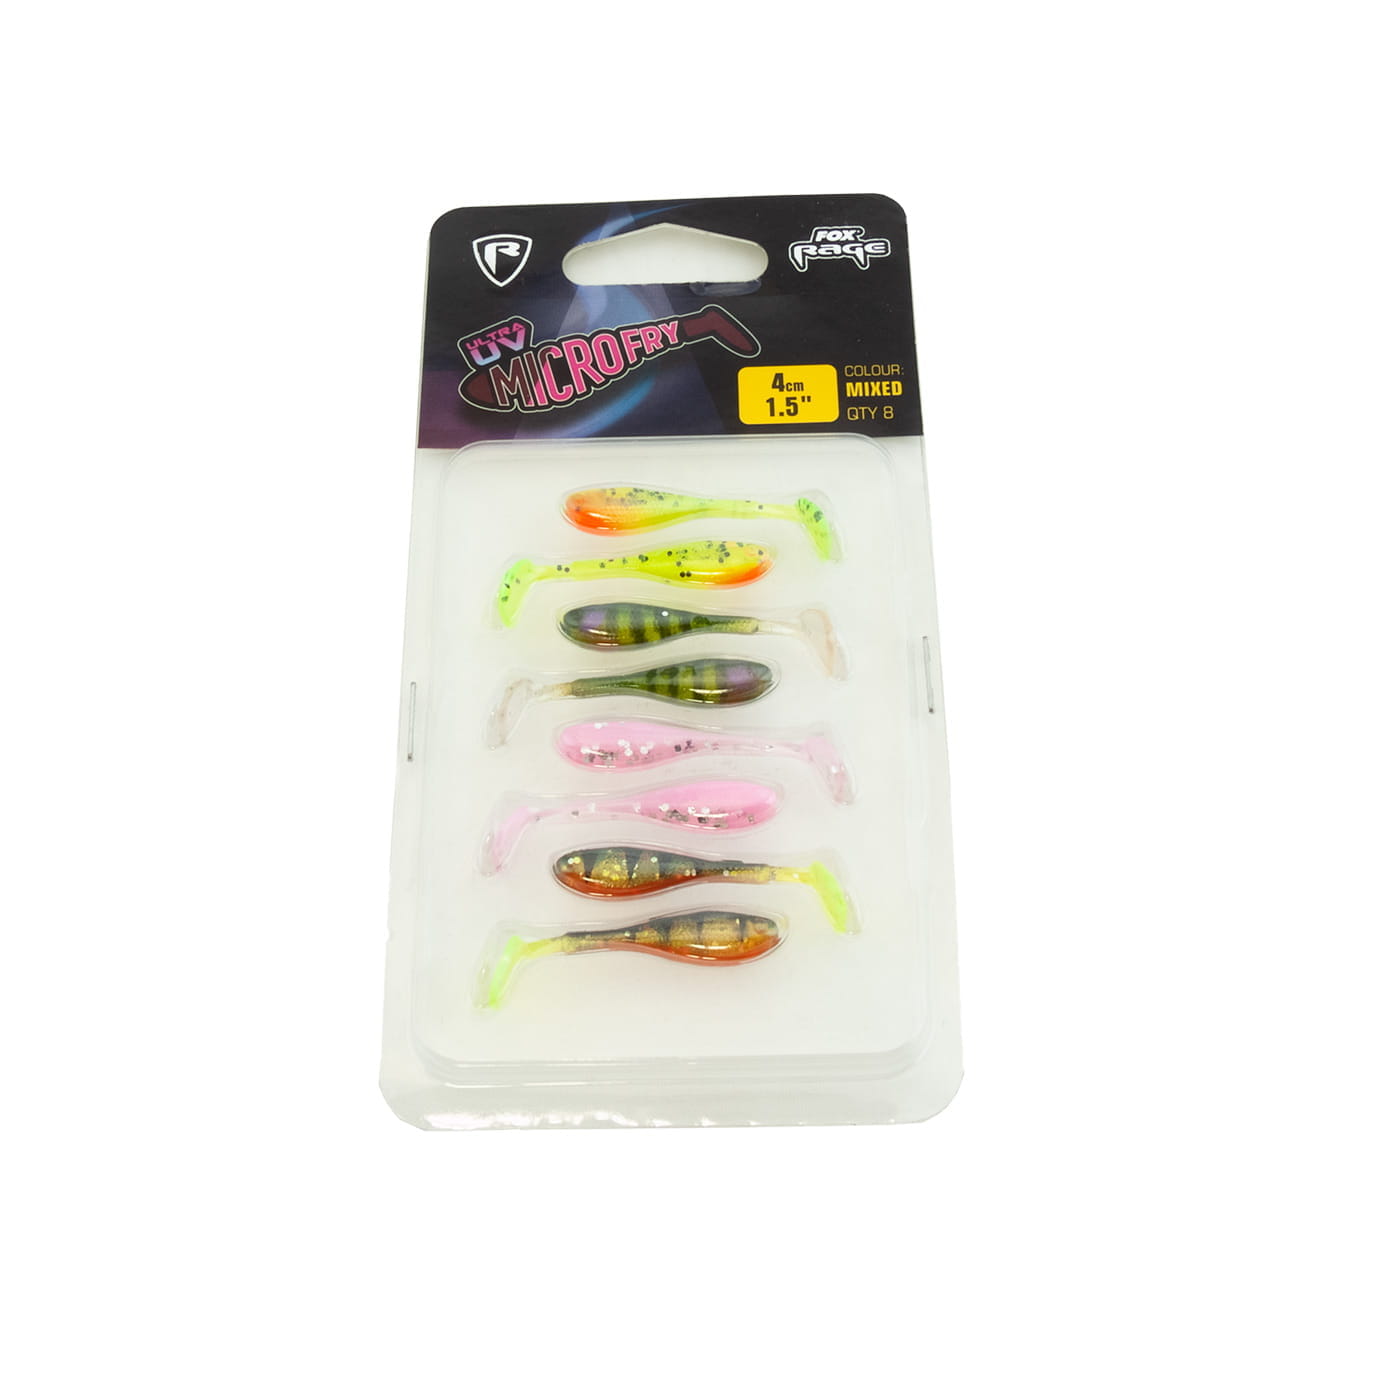 Ultra UV Microfry 4cm - Mixed Colour Pack